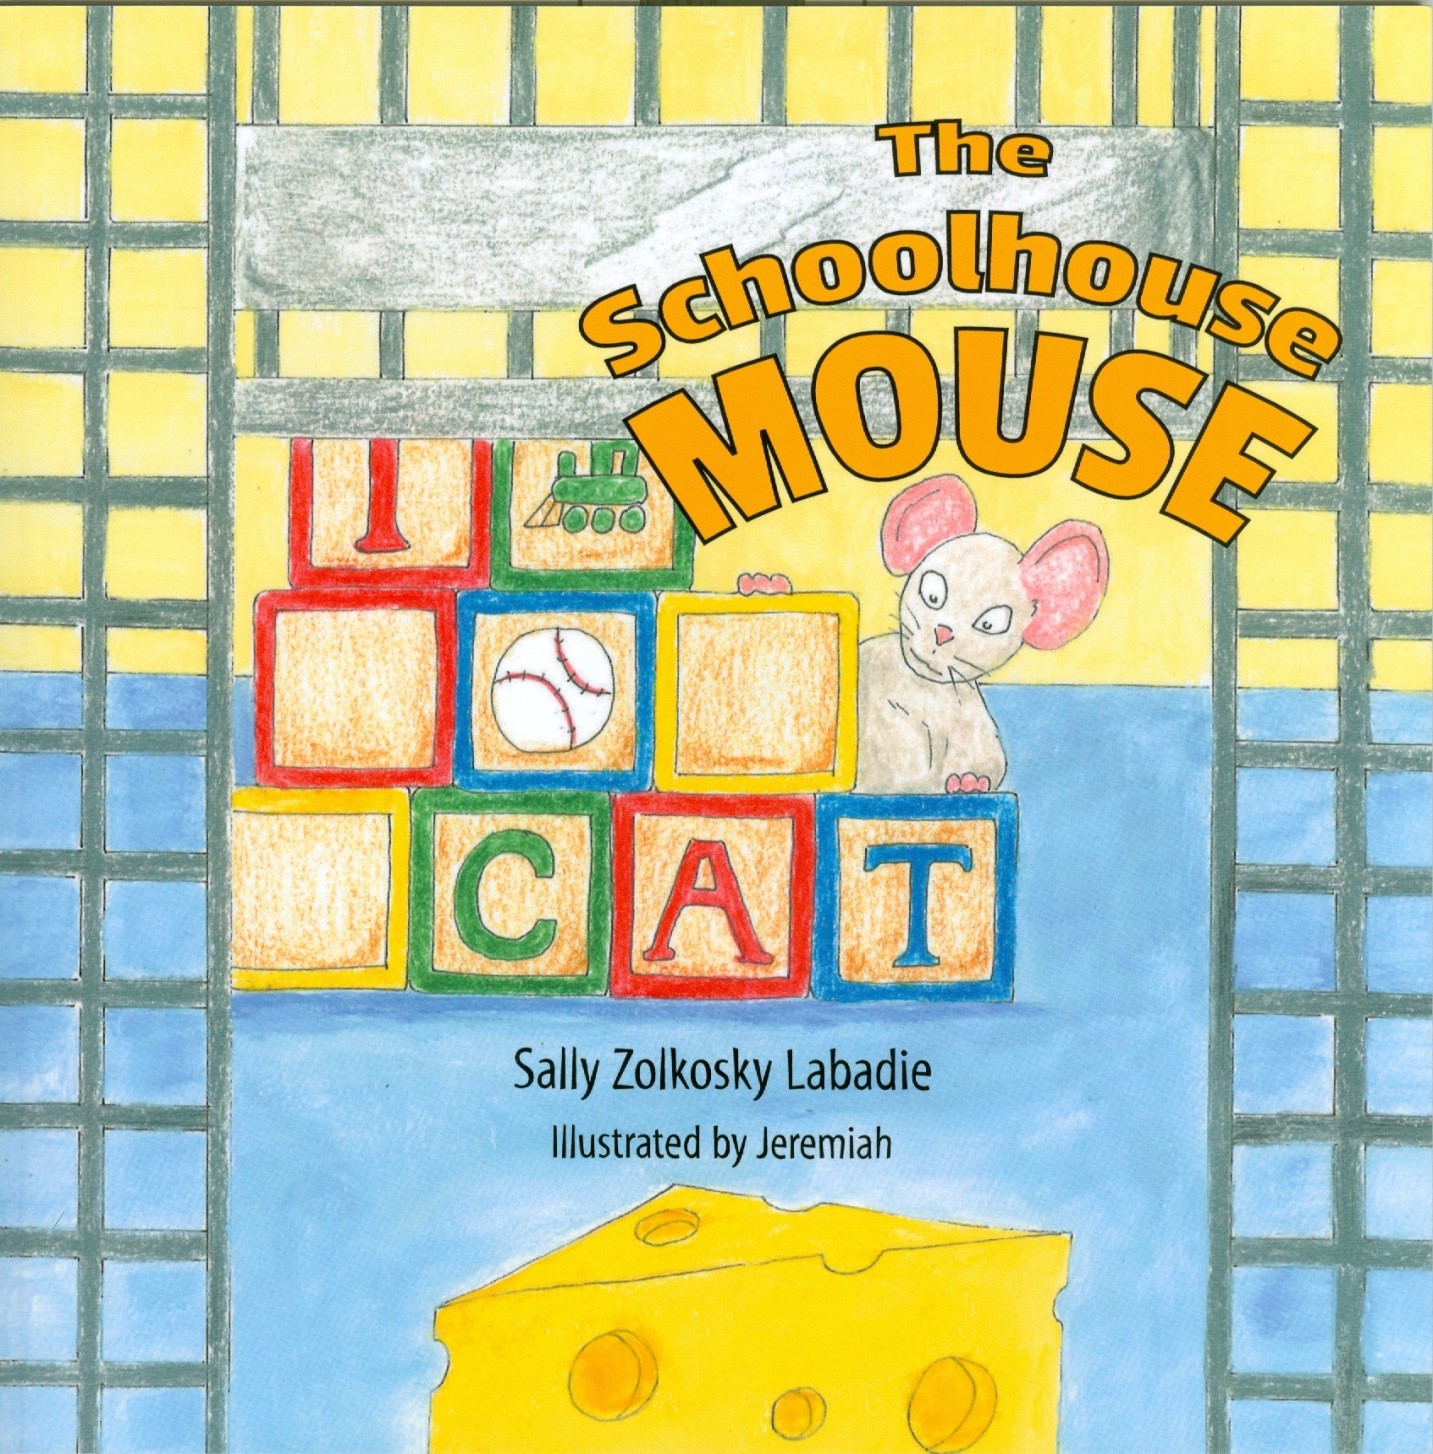 The School House mouse